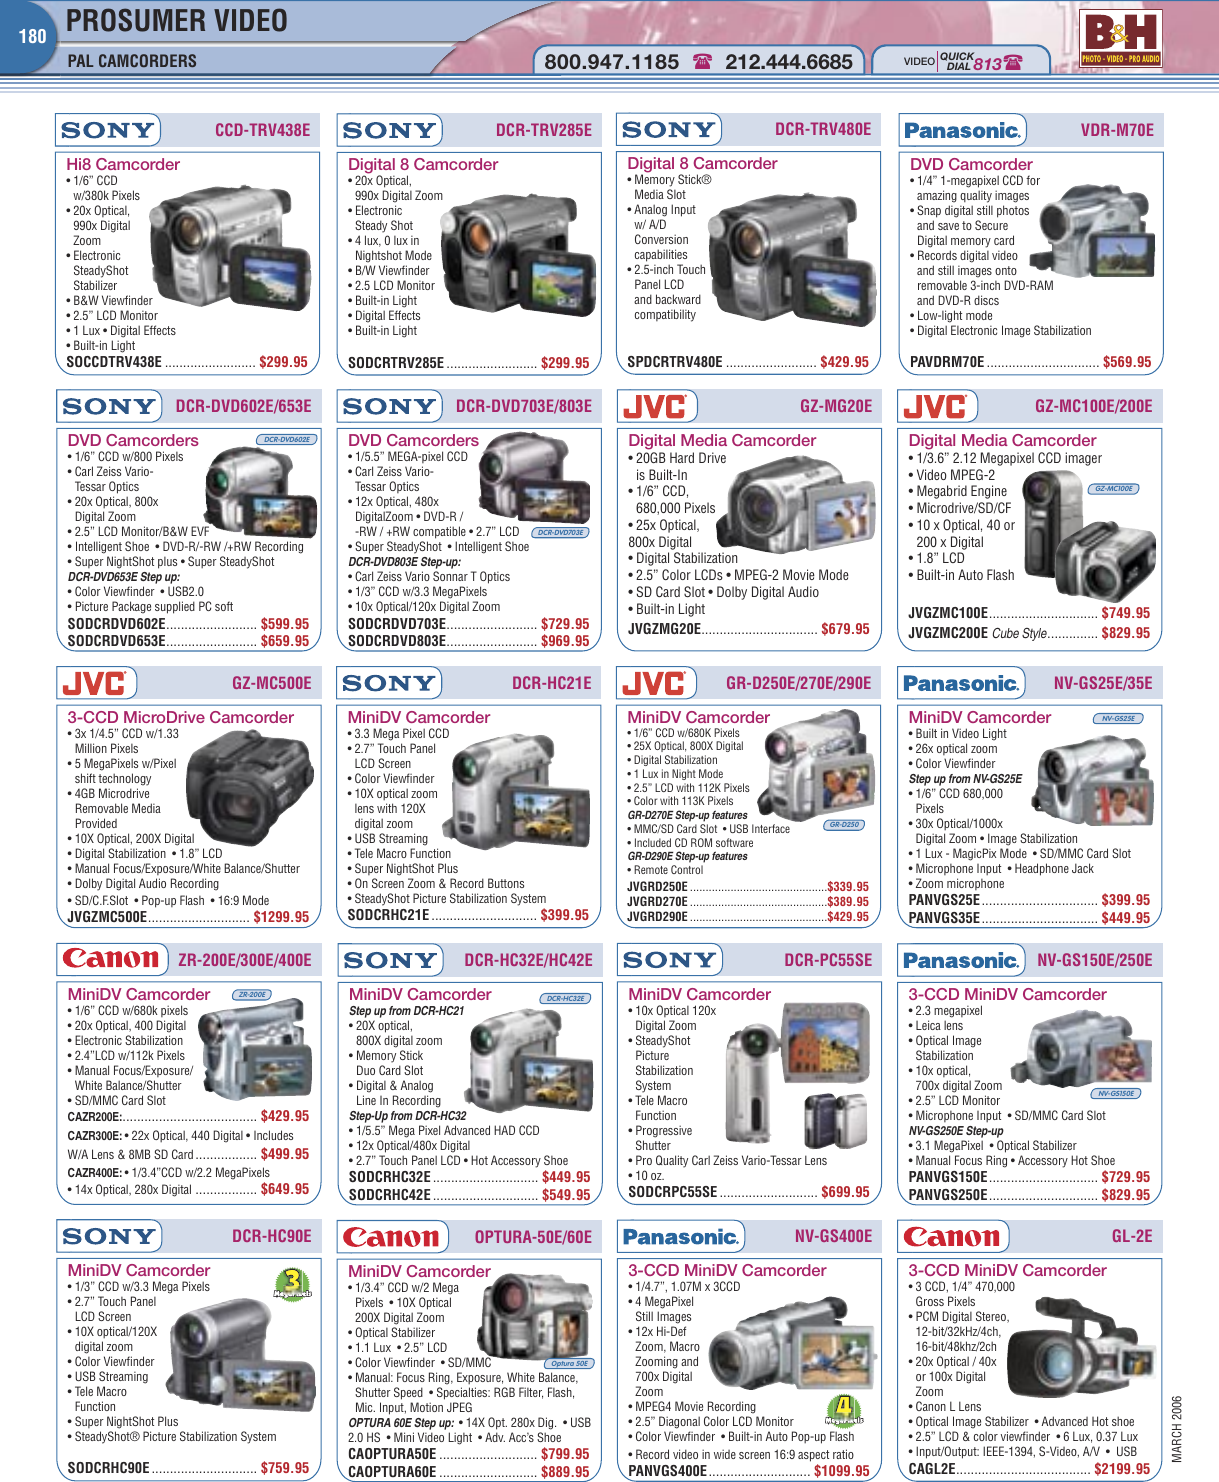 Page 9 of 12 - Canon Canon-Elura-100-Users-Manual- 172-183 ProsumerVideo 03-06  Canon-elura-100-users-manual